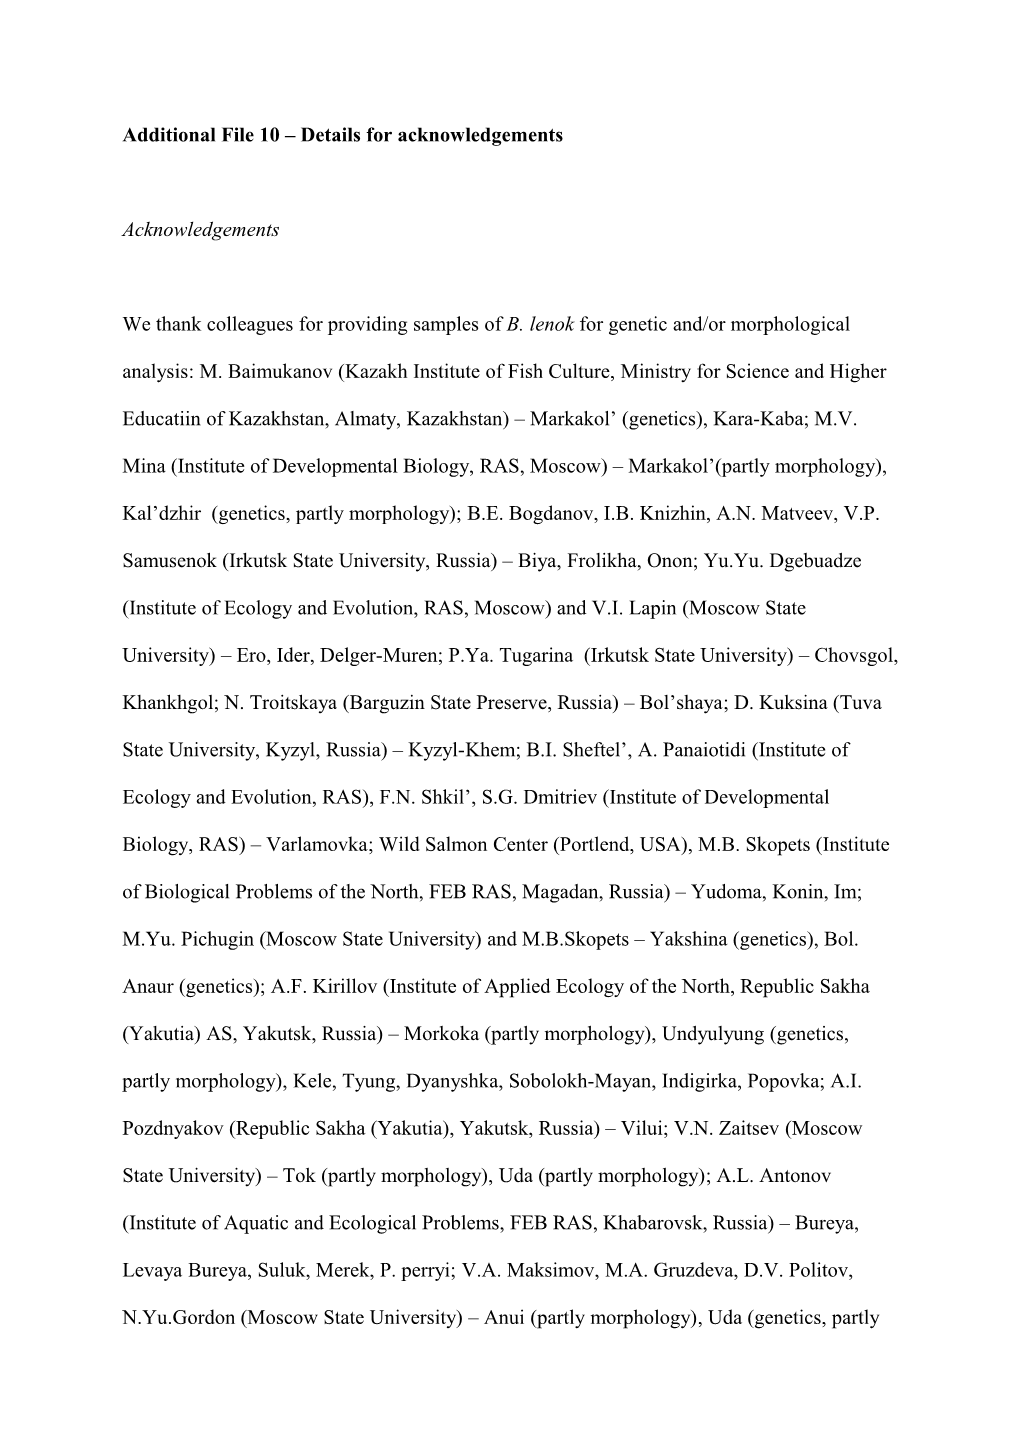 Additional File 8 Details for Acknowledgements